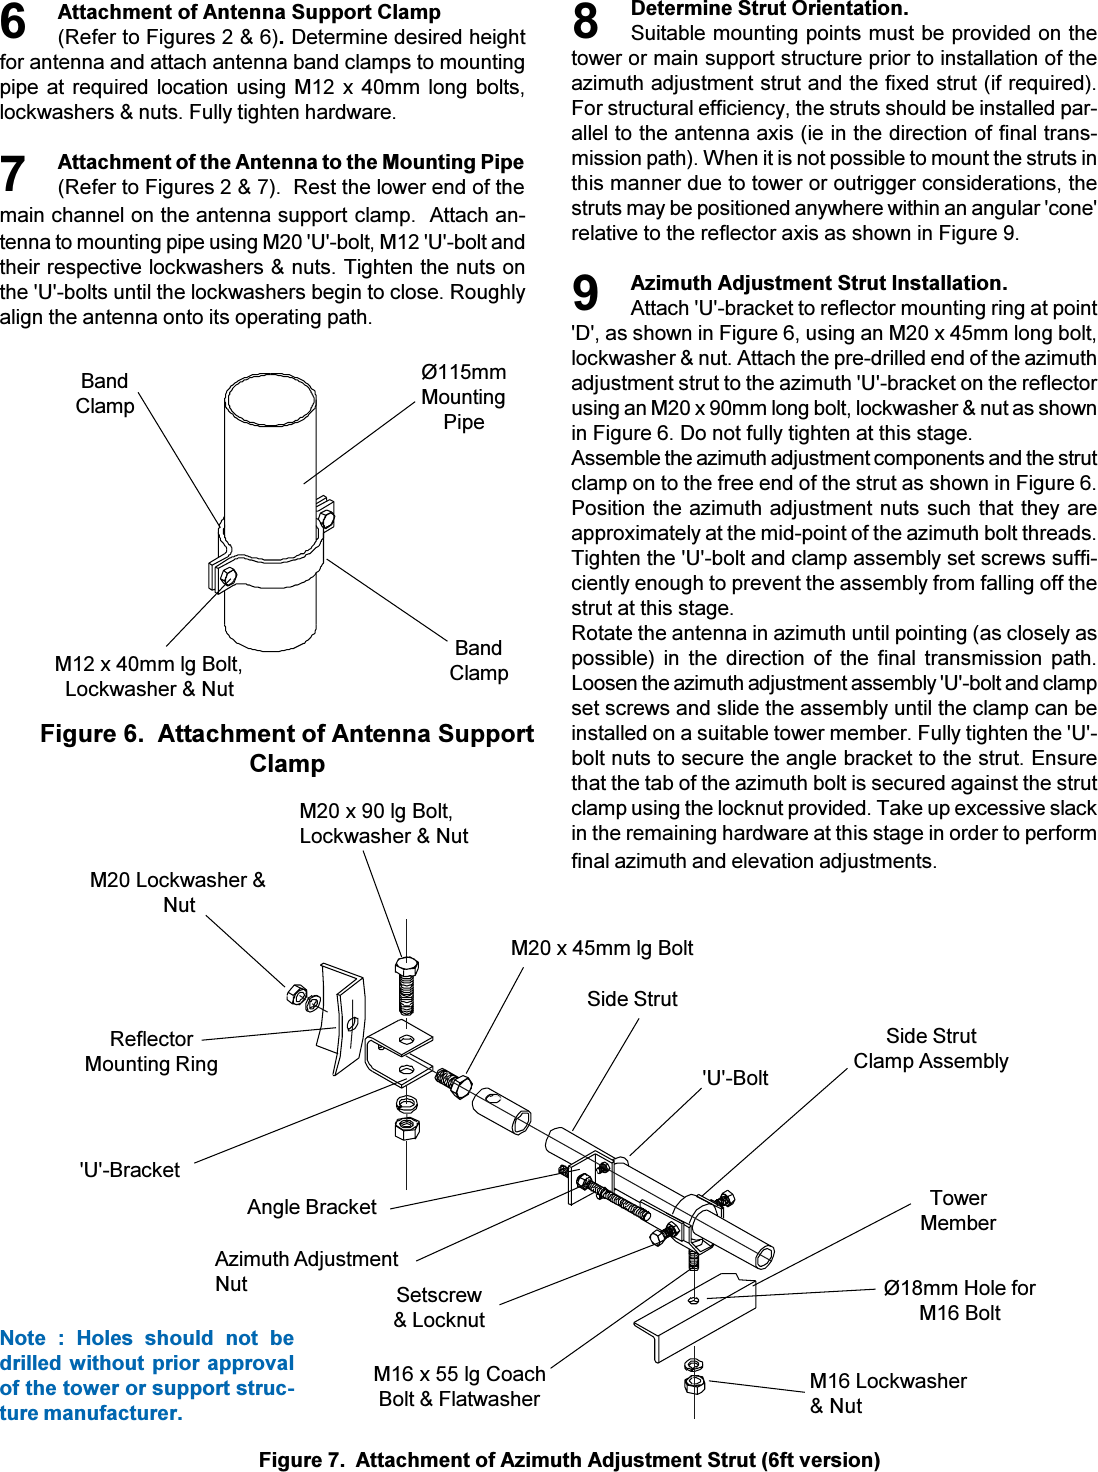 Attachment of Antenna Support Clamp(Refer to Figures 2 &amp; 6). Determine desired heightfor antenna and attach antenna band clamps to mountingpipe at required location using M12 x 40mm long  bolts,lockwashers &amp; nuts. Fully tighten hardware.Attachment of the Antenna to the Mounting Pipe(Refer to Figures 2 &amp; 7).  Rest the lower end of themain channel on the antenna support clamp.  Attach an-tenna to mounting pipe using M20 &apos;U&apos;-bolt, M12 &apos;U&apos;-bolt andtheir respective lockwashers &amp; nuts. Tighten the nuts onthe &apos;U&apos;-bolts until the lockwashers begin to close. Roughlyalign the antenna onto its operating path.Figure 7.  Attachment of Azimuth Adjustment Strut (6ft version)76M20 Lockwasher &amp;NutReflectorMounting Ring&apos;U&apos;-BracketM20 x 45mm lg BoltM20 x 90 lg Bolt,Lockwasher &amp; NutM16 x 55 lg CoachBolt &amp; FlatwasherSetscrew&amp; LocknutAzimuth AdjustmentNutAngle BracketNote  :  Holes  should  not  bedrilled without prior approvalof the tower or support struc-ture manufacturer.M12 x 40mm lg Bolt,Lockwasher &amp; NutBandClampØ115mmMountingPipeBandClampFigure 6.  Attachment of Antenna SupportClampDetermine Strut Orientation.Suitable mounting points must be provided on thetower or main support structure prior to installation of theazimuth adjustment strut and the fixed strut (if required).For structural efficiency, the struts should be installed par-allel to the antenna axis (ie in the direction of final trans-mission path). When it is not possible to mount the struts inthis manner due to tower or outrigger considerations, thestruts may be positioned anywhere within an angular &apos;cone&apos;relative to the reflector axis as shown in Figure 9.Azimuth Adjustment Strut Installation.Attach &apos;U&apos;-bracket to reflector mounting ring at point&apos;D&apos;, as shown in Figure 6, using an M20 x 45mm long bolt,lockwasher &amp; nut. Attach the pre-drilled end of the azimuthadjustment strut to the azimuth &apos;U&apos;-bracket on the reflectorusing an M20 x 90mm long bolt, lockwasher &amp; nut as shownin Figure 6. Do not fully tighten at this stage.Assemble the azimuth adjustment components and the strutclamp on to the free end of the strut as shown in Figure 6.Position the azimuth adjustment nuts such that they areapproximately at the mid-point of the azimuth bolt threads.Tighten the &apos;U&apos;-bolt and clamp assembly set screws suffi-ciently enough to prevent the assembly from falling off thestrut at this stage.Rotate the antenna in azimuth until pointing (as closely aspossible)  in  the  direction  of  the  final  transmission  path.Loosen the azimuth adjustment assembly &apos;U&apos;-bolt and clampset screws and slide the assembly until the clamp can beinstalled on a suitable tower member. Fully tighten the &apos;U&apos;-bolt nuts to secure the angle bracket to the strut. Ensurethat the tab of the azimuth bolt is secured against the strutclamp using the locknut provided. Take up excessive slackin the remaining hardware at this stage in order to performfinal azimuth and elevation adjustments.8TowerMemberØ18mm Hole forM16 Bolt9Side StrutClamp AssemblyM16 Lockwasher&amp; NutSide Strut&apos;U&apos;-Bolt